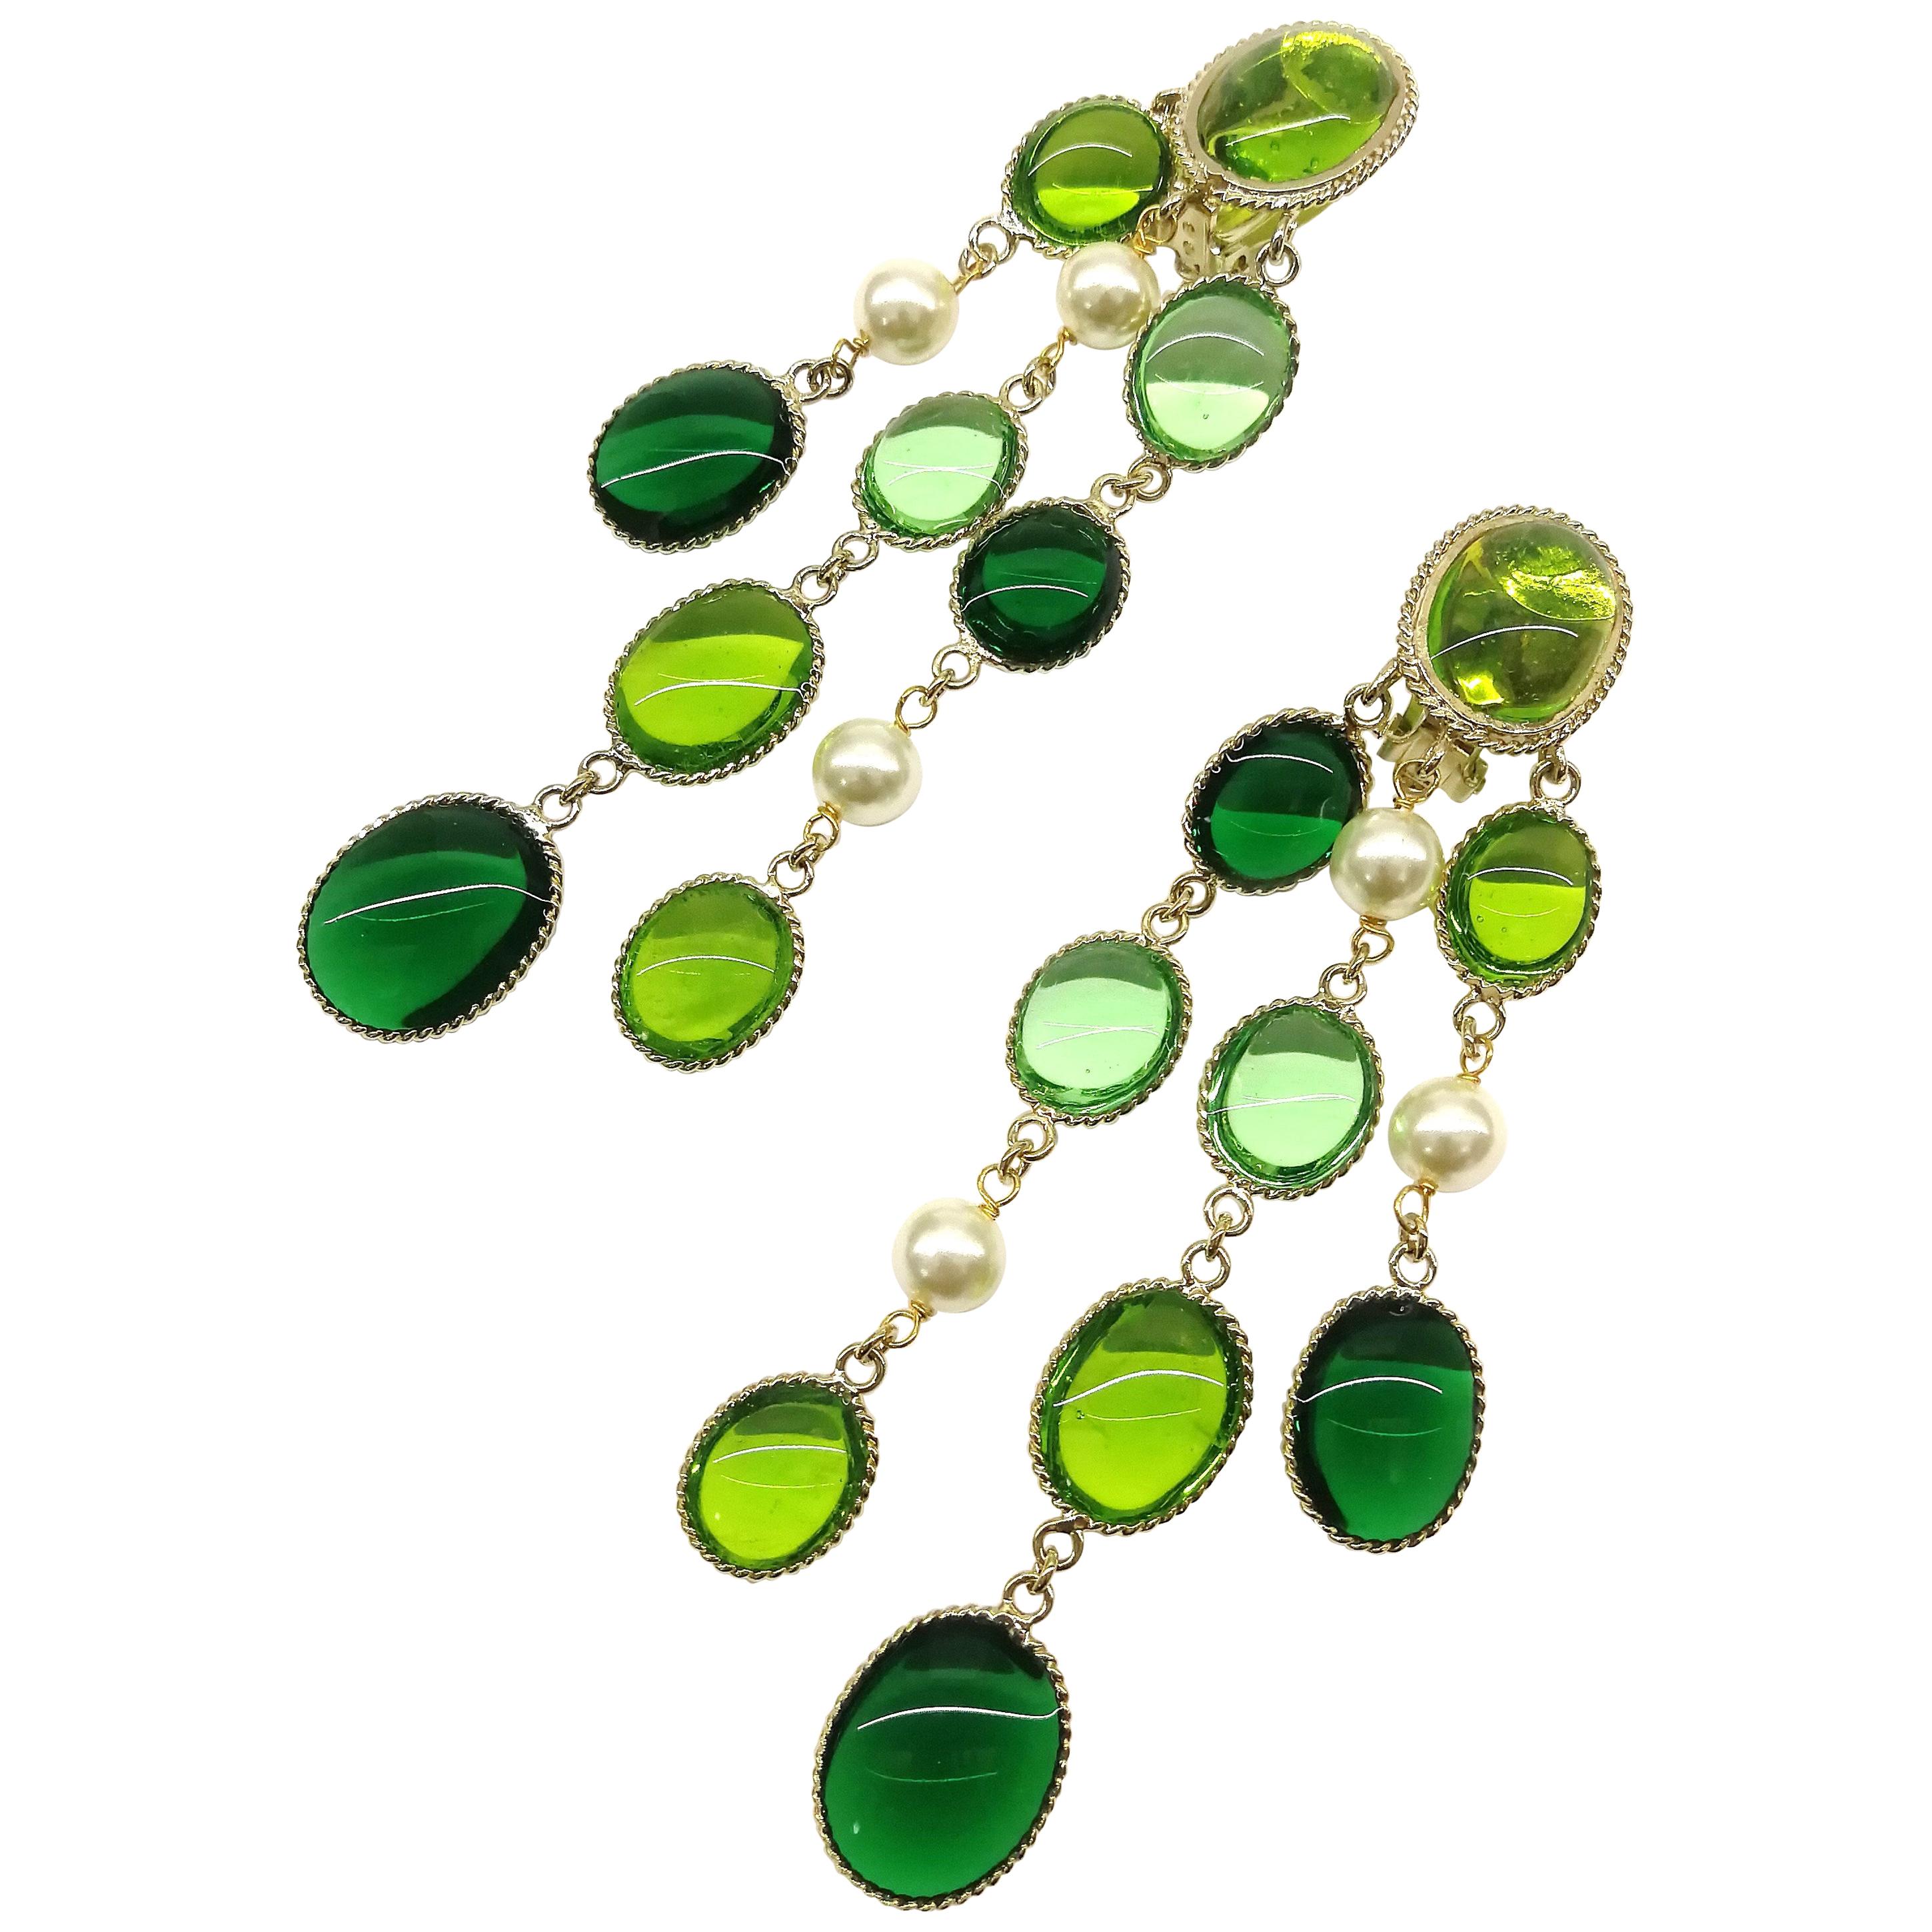 'WW' emerald and peridot poured glass, pearl 'Harlequin' drop earrings, 2018 For Sale